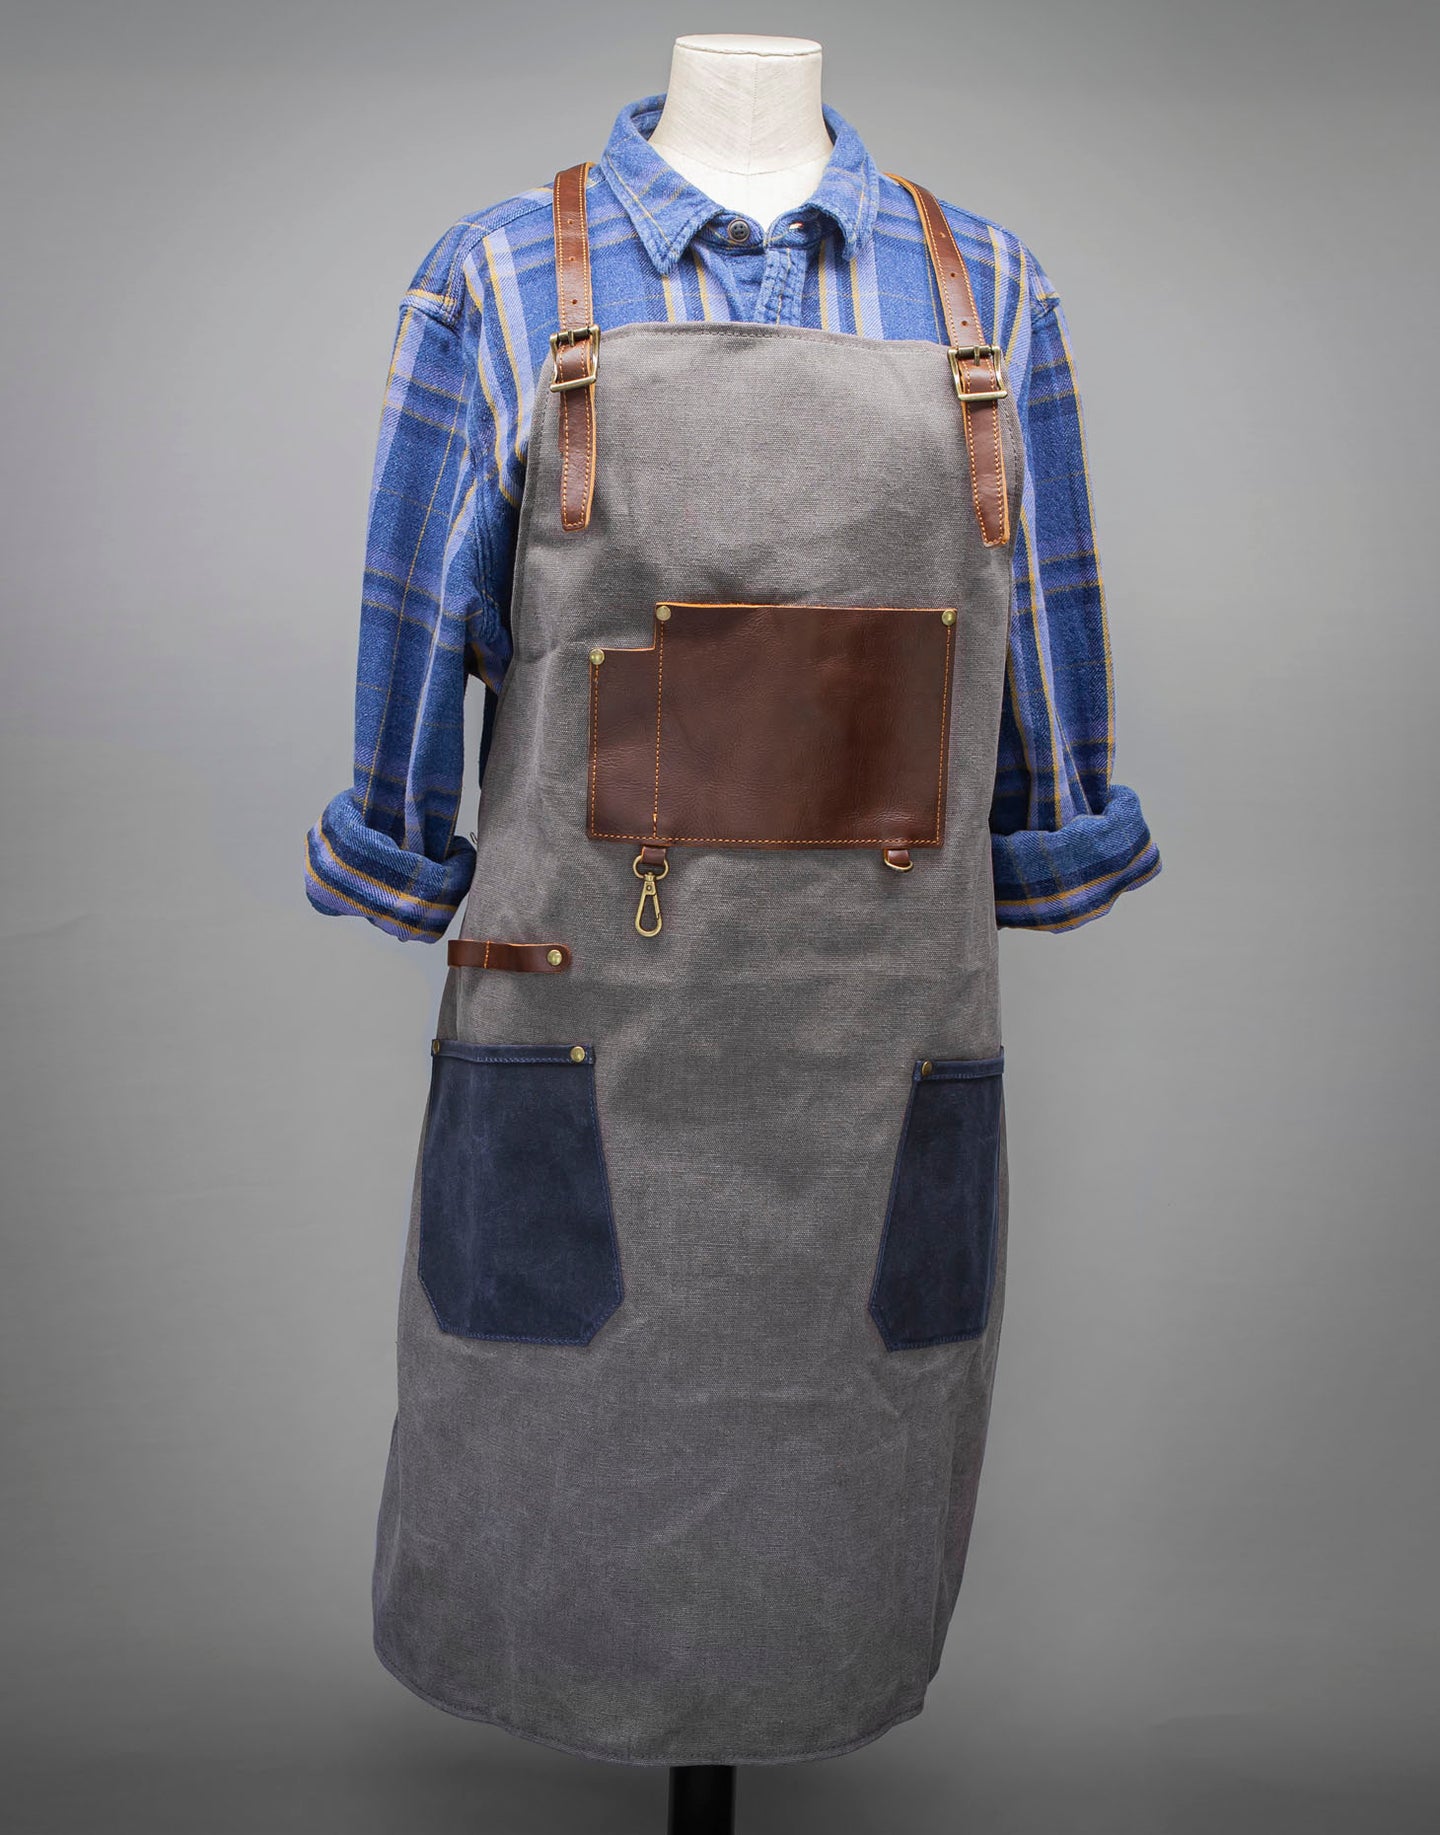 Heavy grade cotton canvas and leather apron by Cotswold Hipster The Upton